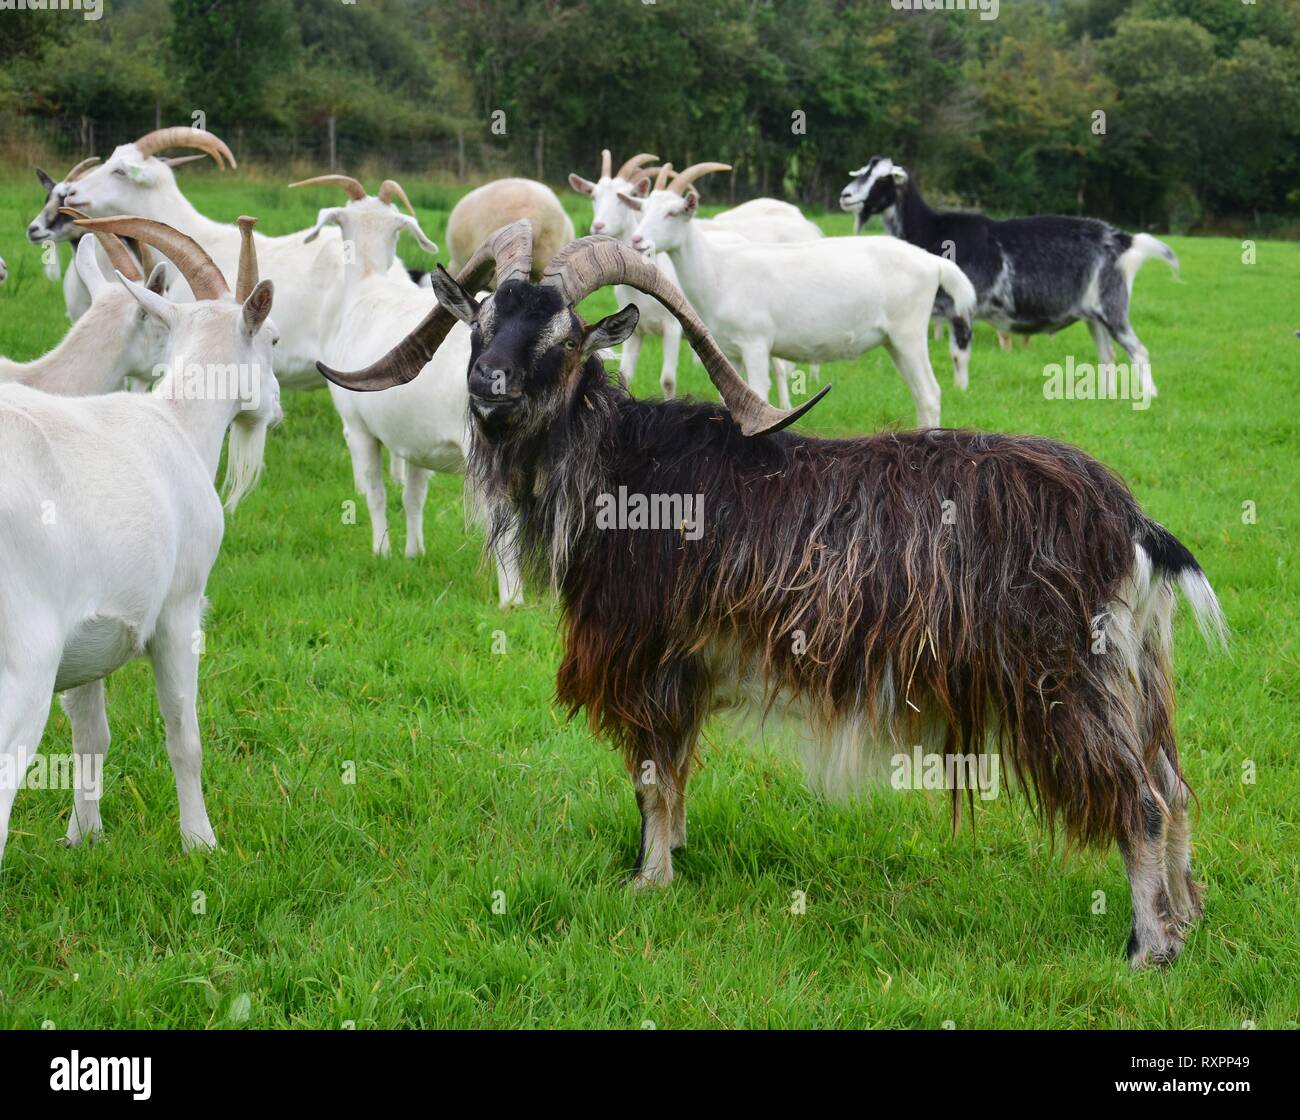 An impressive male goat with horns, standing on a meadow with other goats. Ireland. Stock Photo